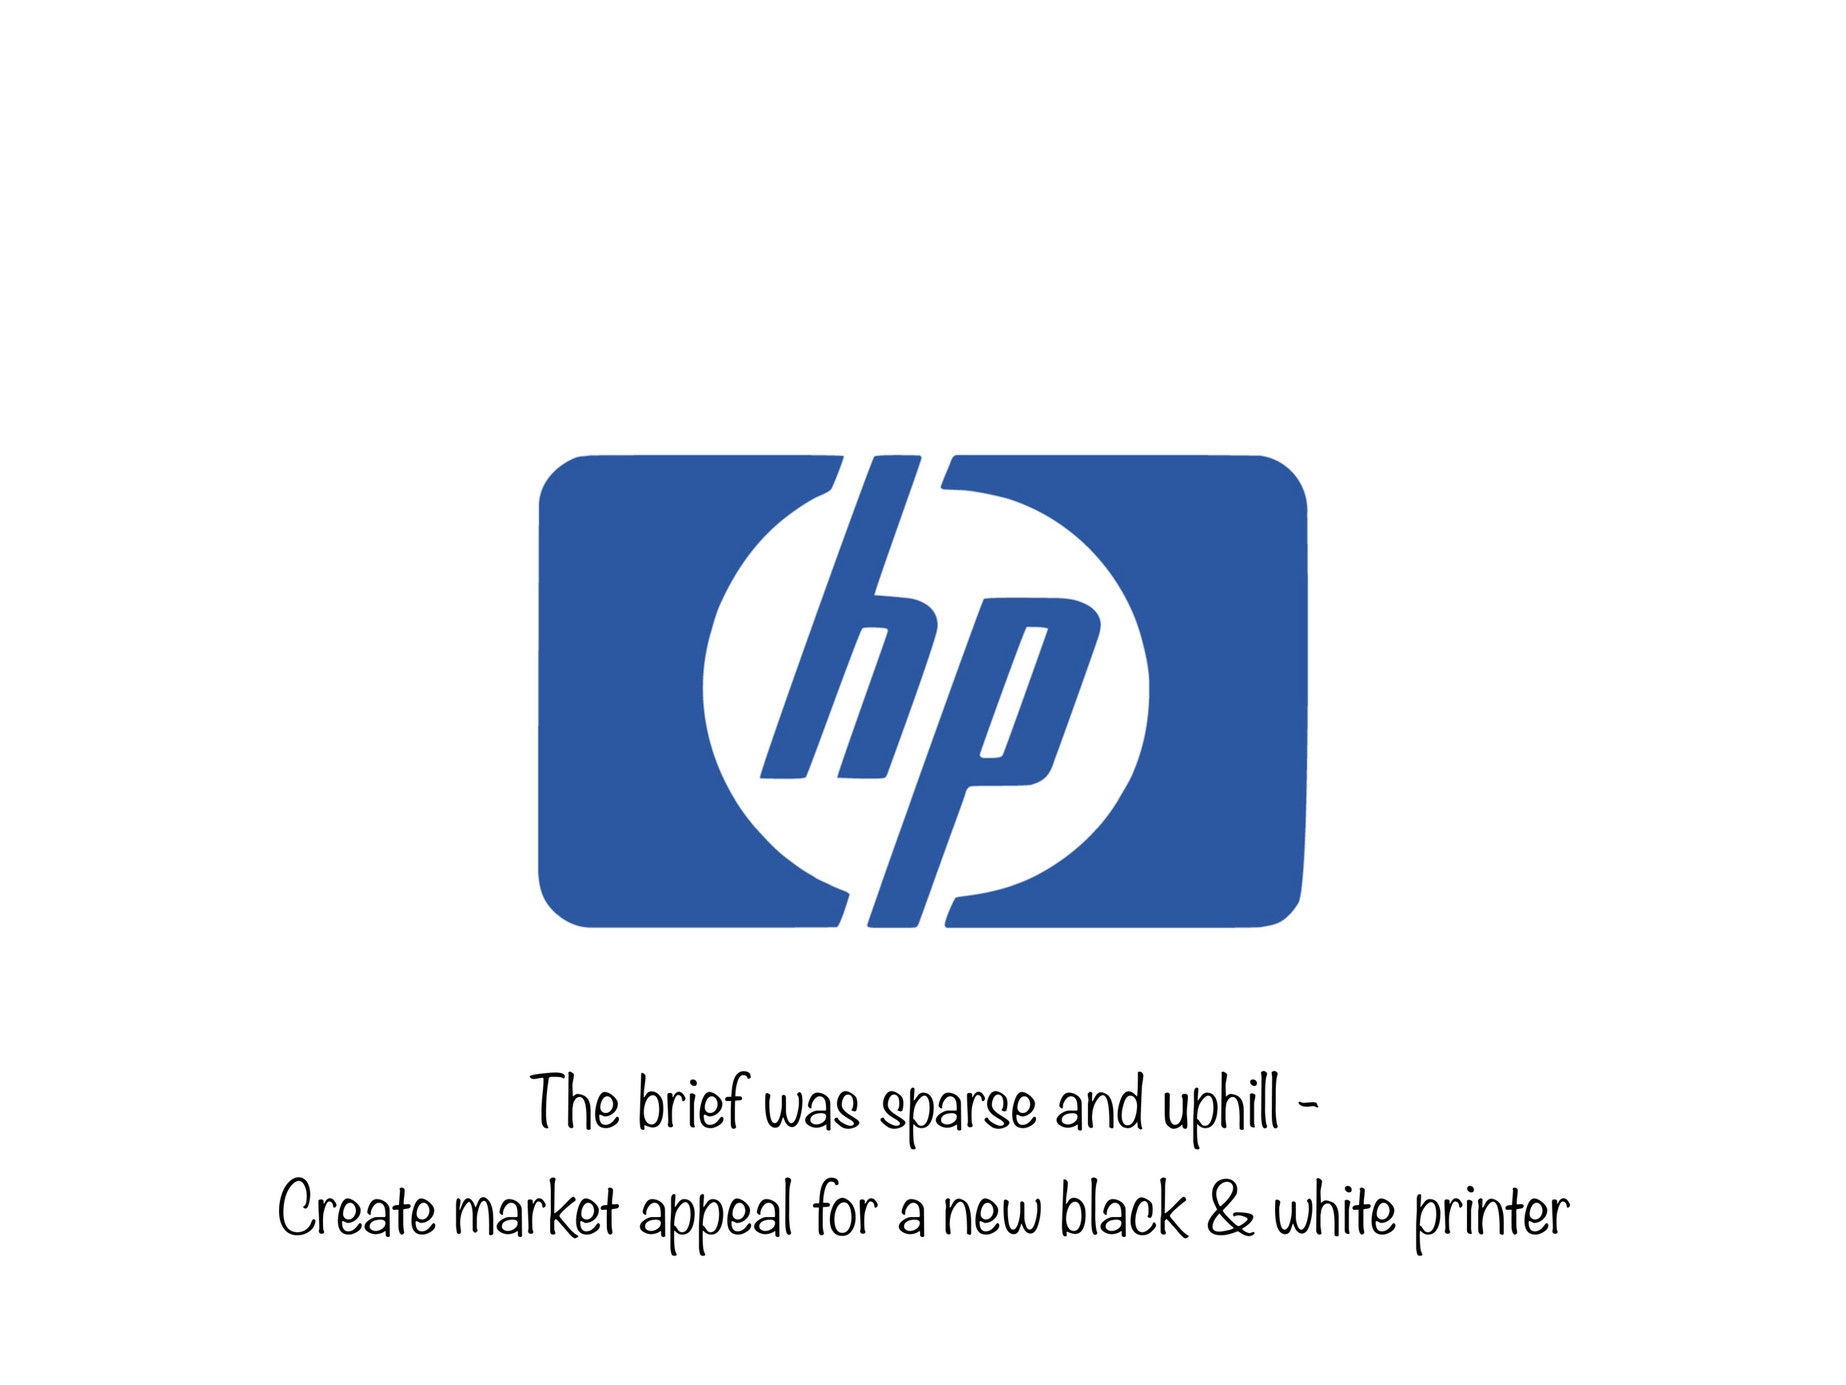 MyPaperSpeaks - HP Black & White Printers - Page 2 - Created with